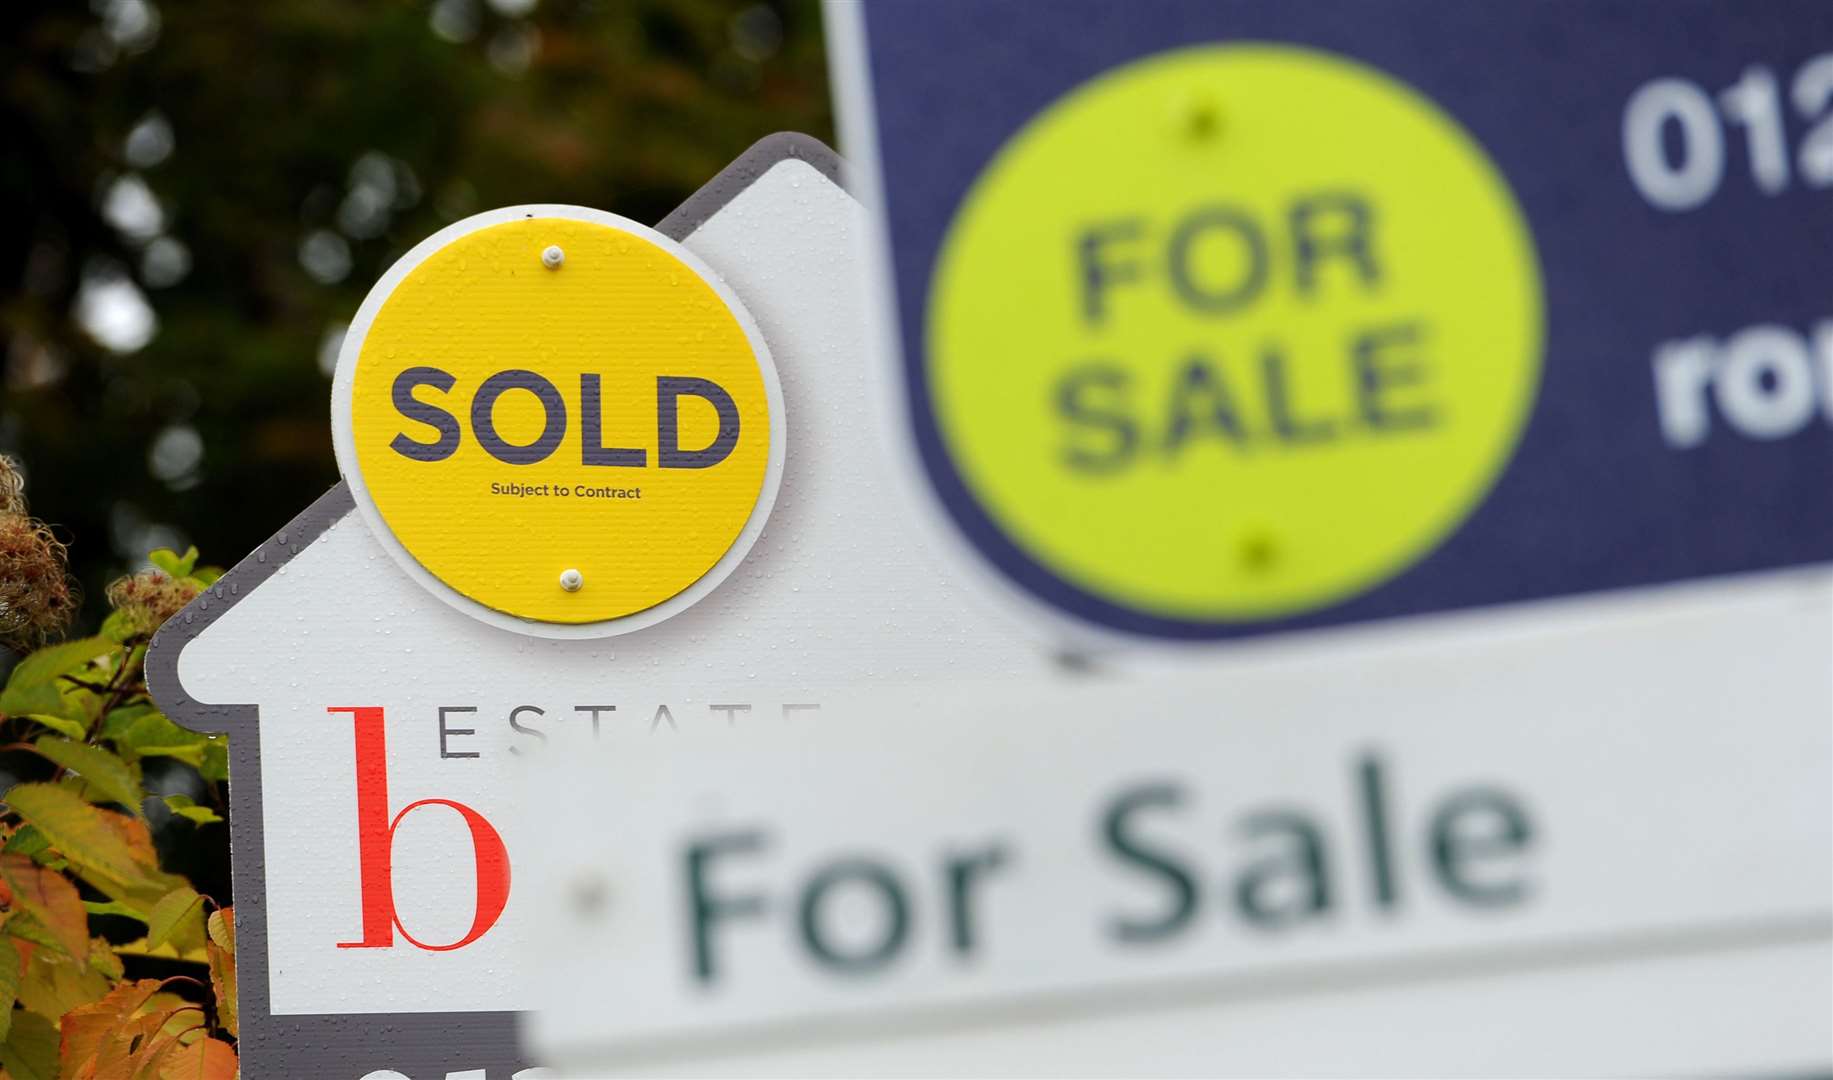 House prices have been rocketing in a sought-after Kent destination Picture: PA/Andrew Matthews